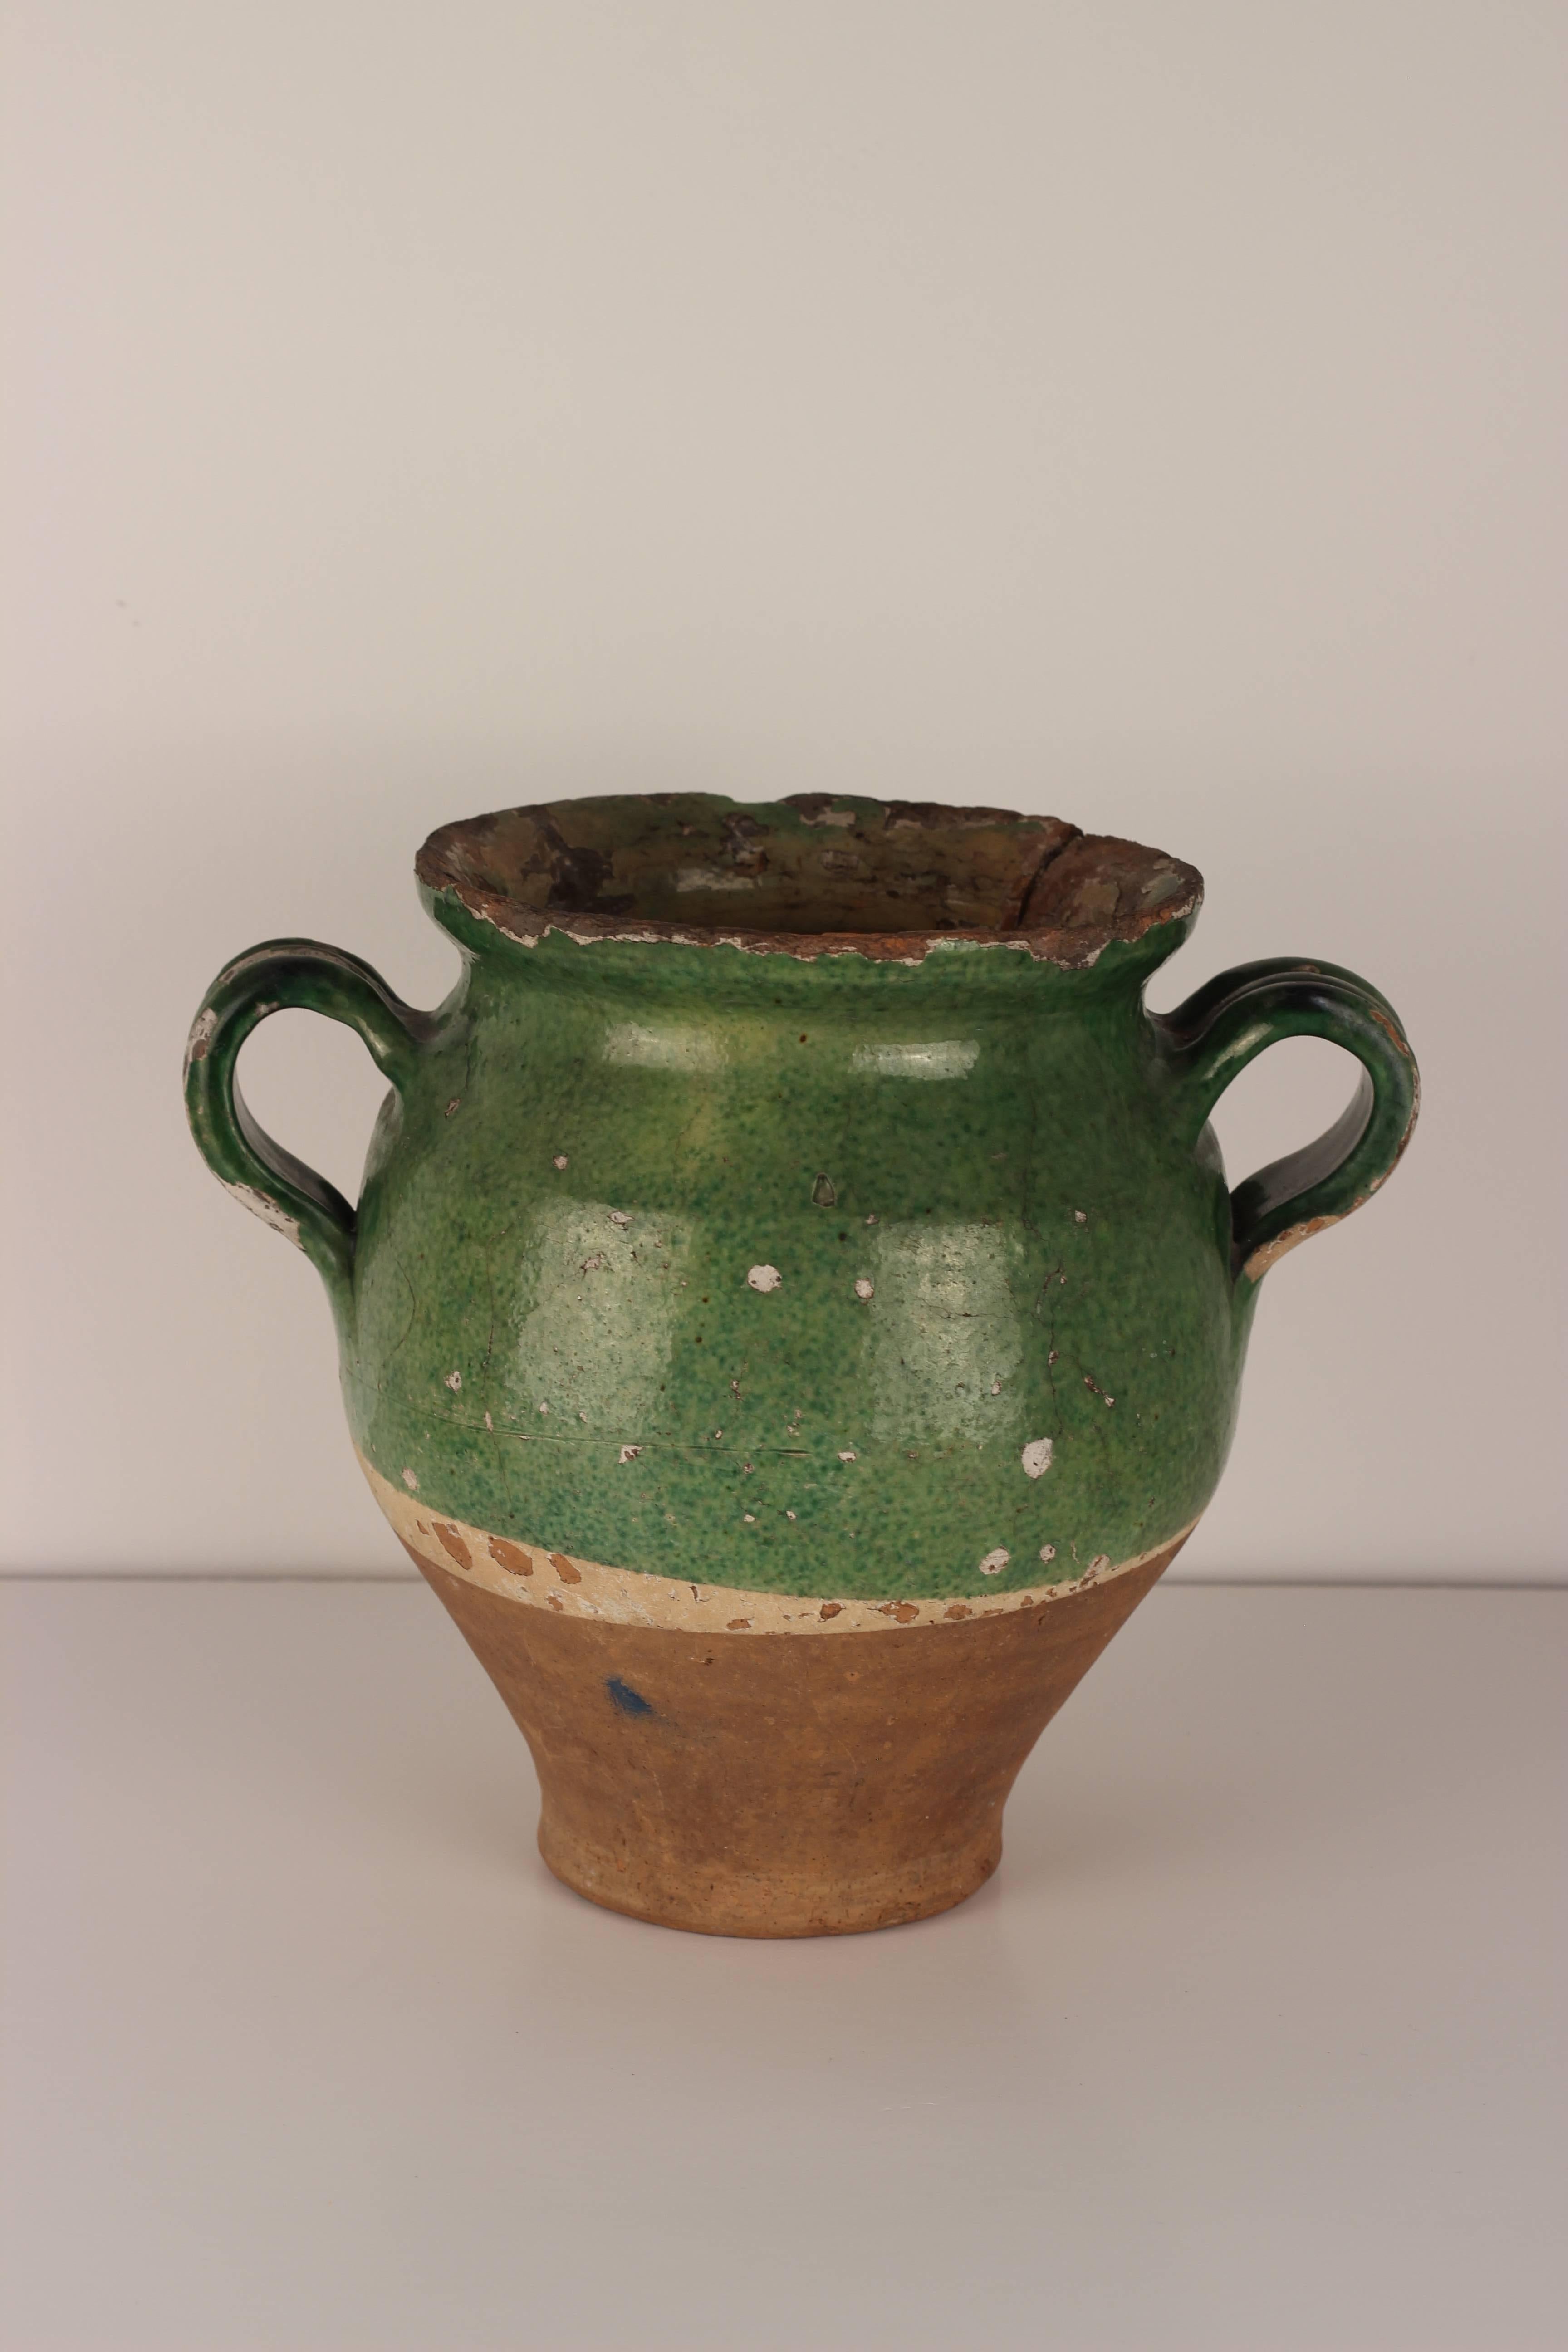 Hand-Crafted Rare Green Confit Pot from the South of France, 19th Century